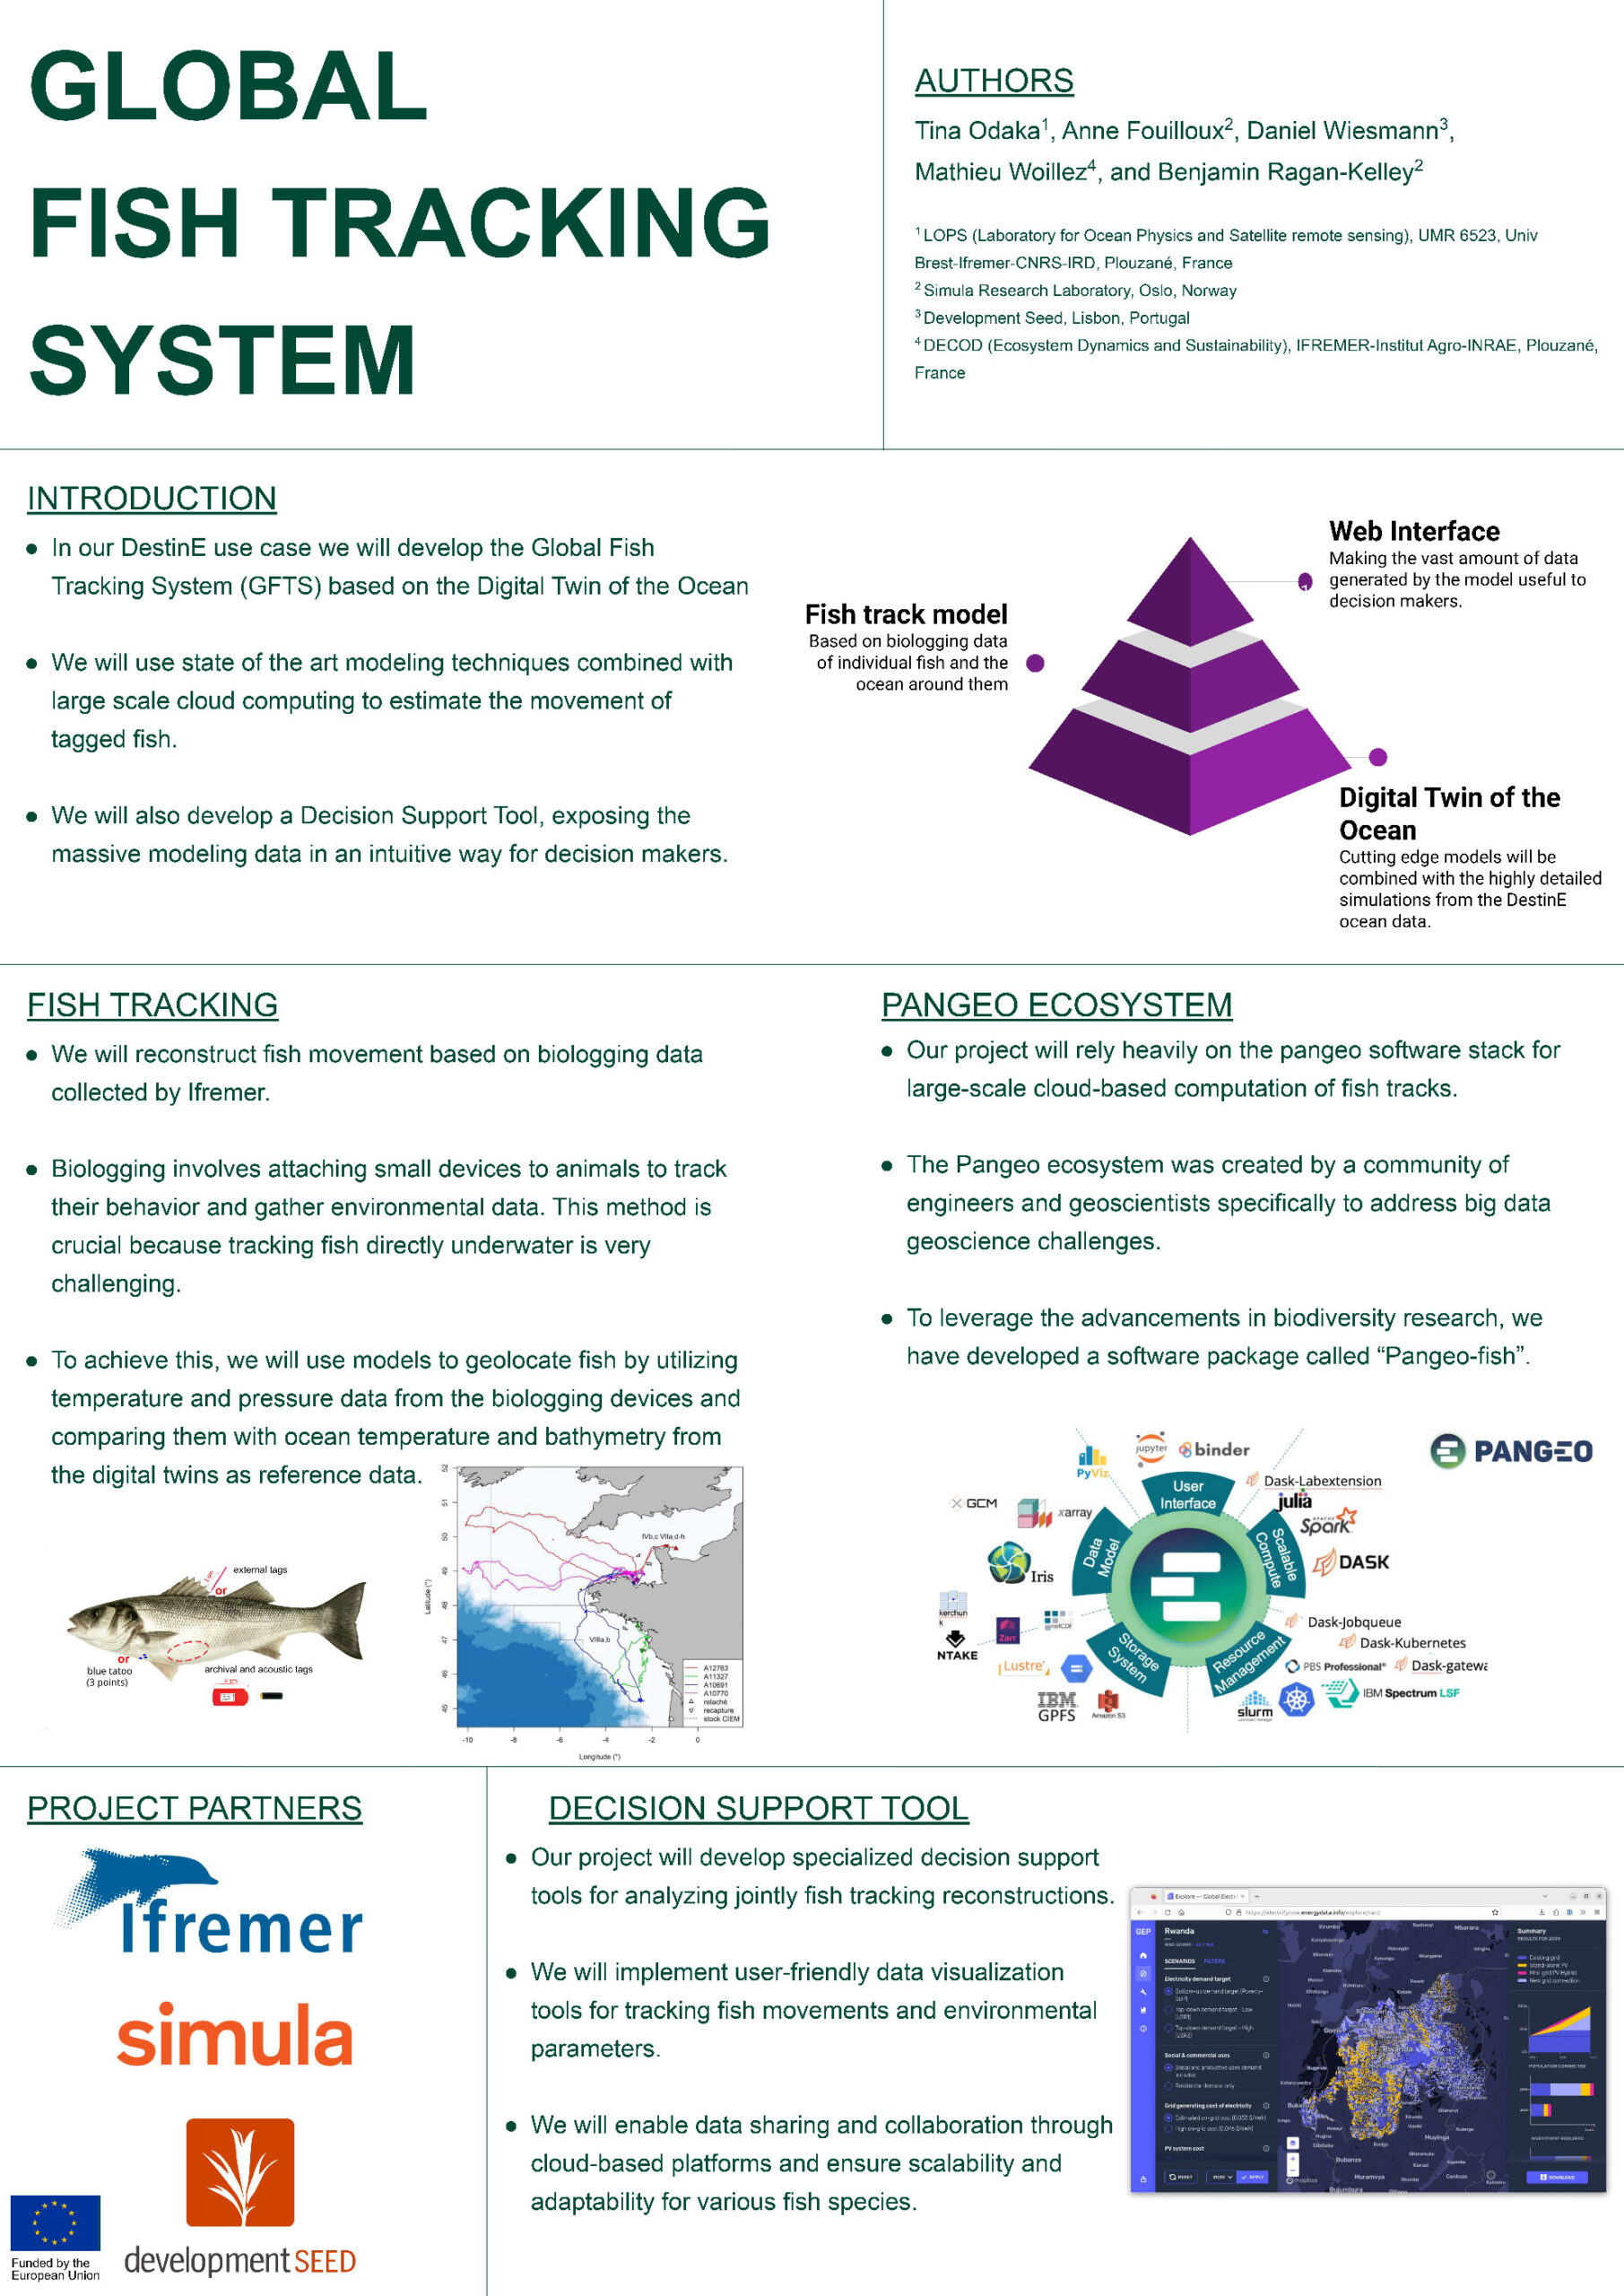 Global Fish Tracking System - a DestinE Use Case